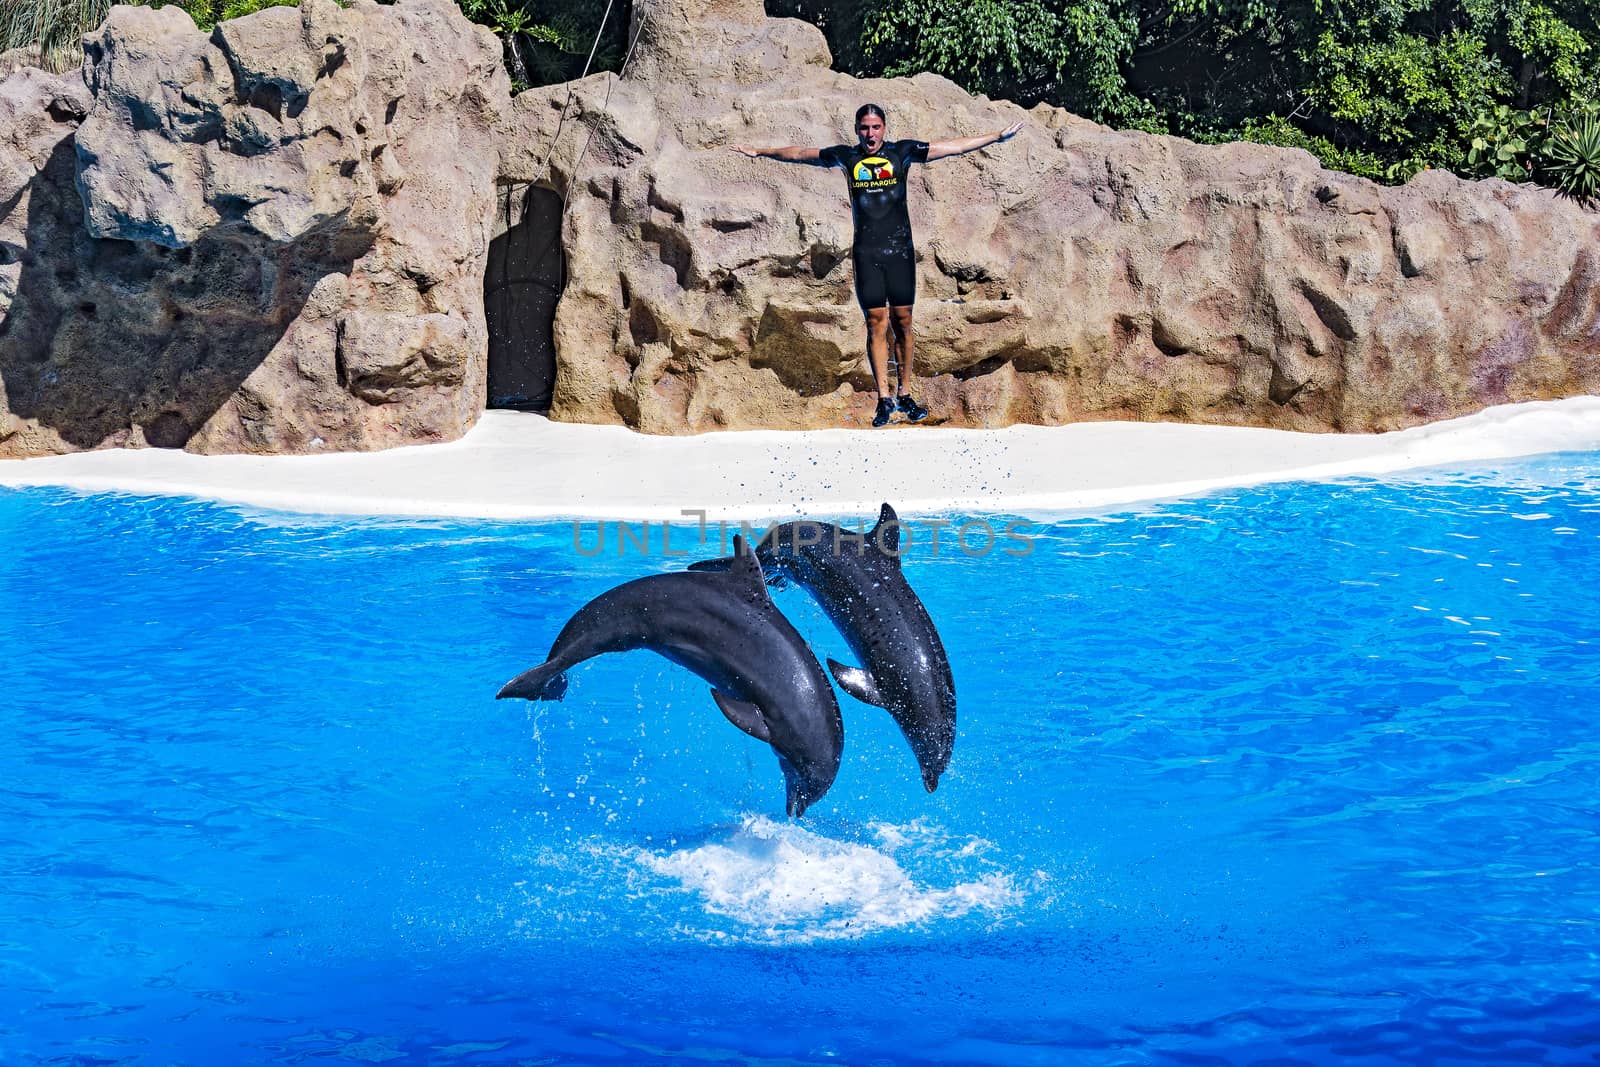 Dolphin show in the Loro Parque (Loro Parque), two dolphin trainer pushed out of the water, 13.09.2016, (Tenerife, Spain).